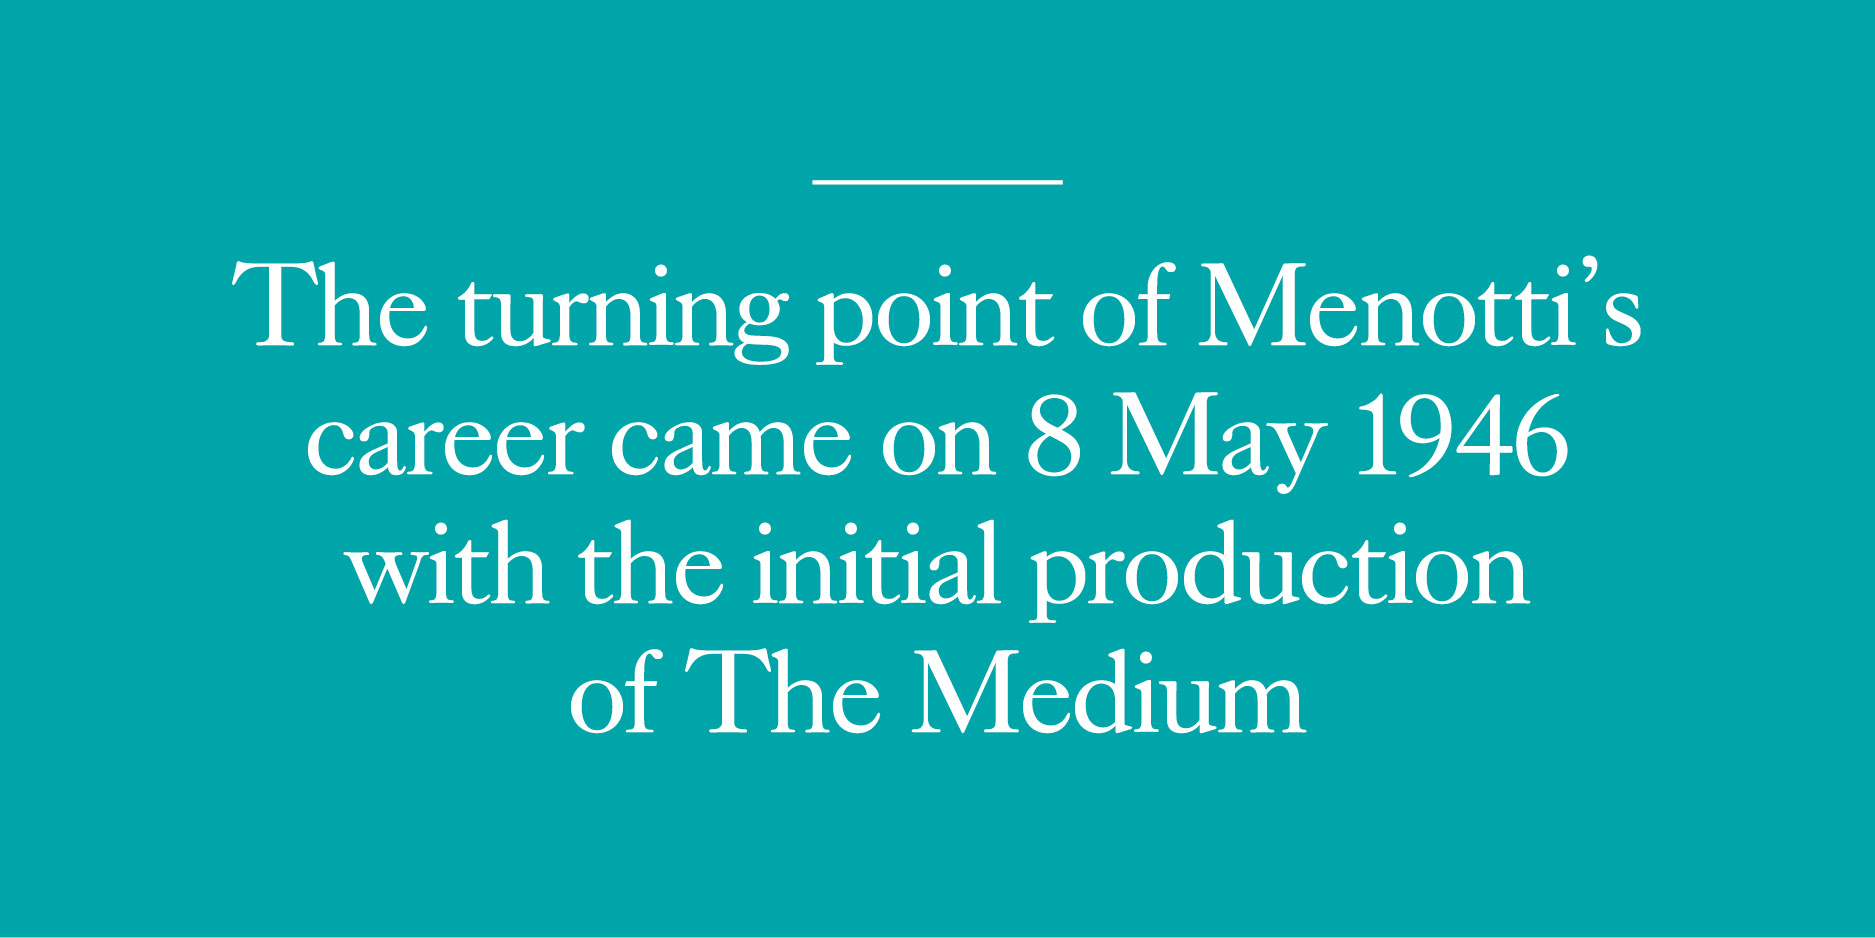 The turning point of Menotti's career came on 8 May 1946 with the initial production of The Medium